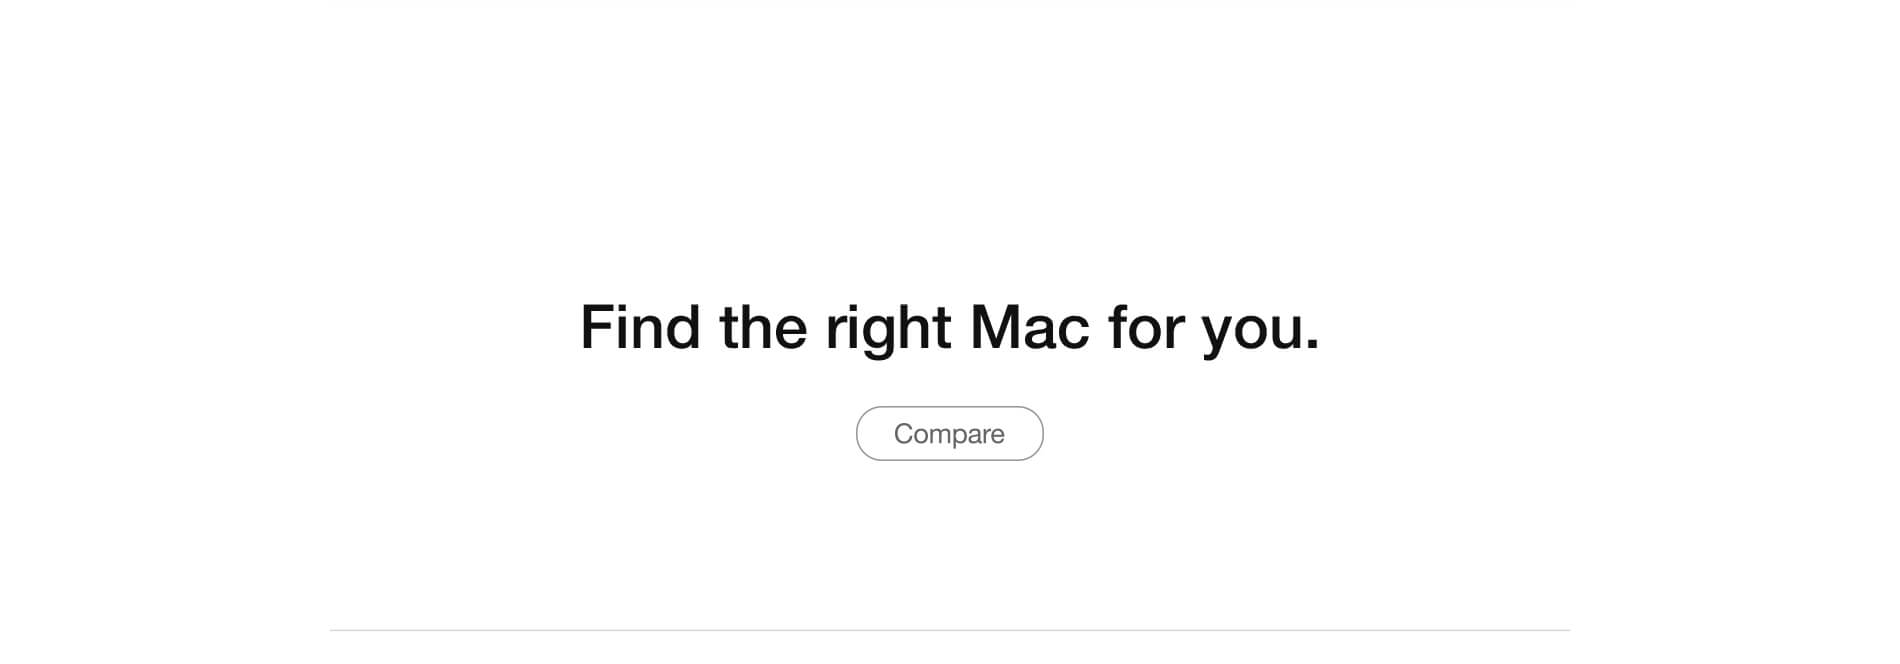 Find the right Mac for you